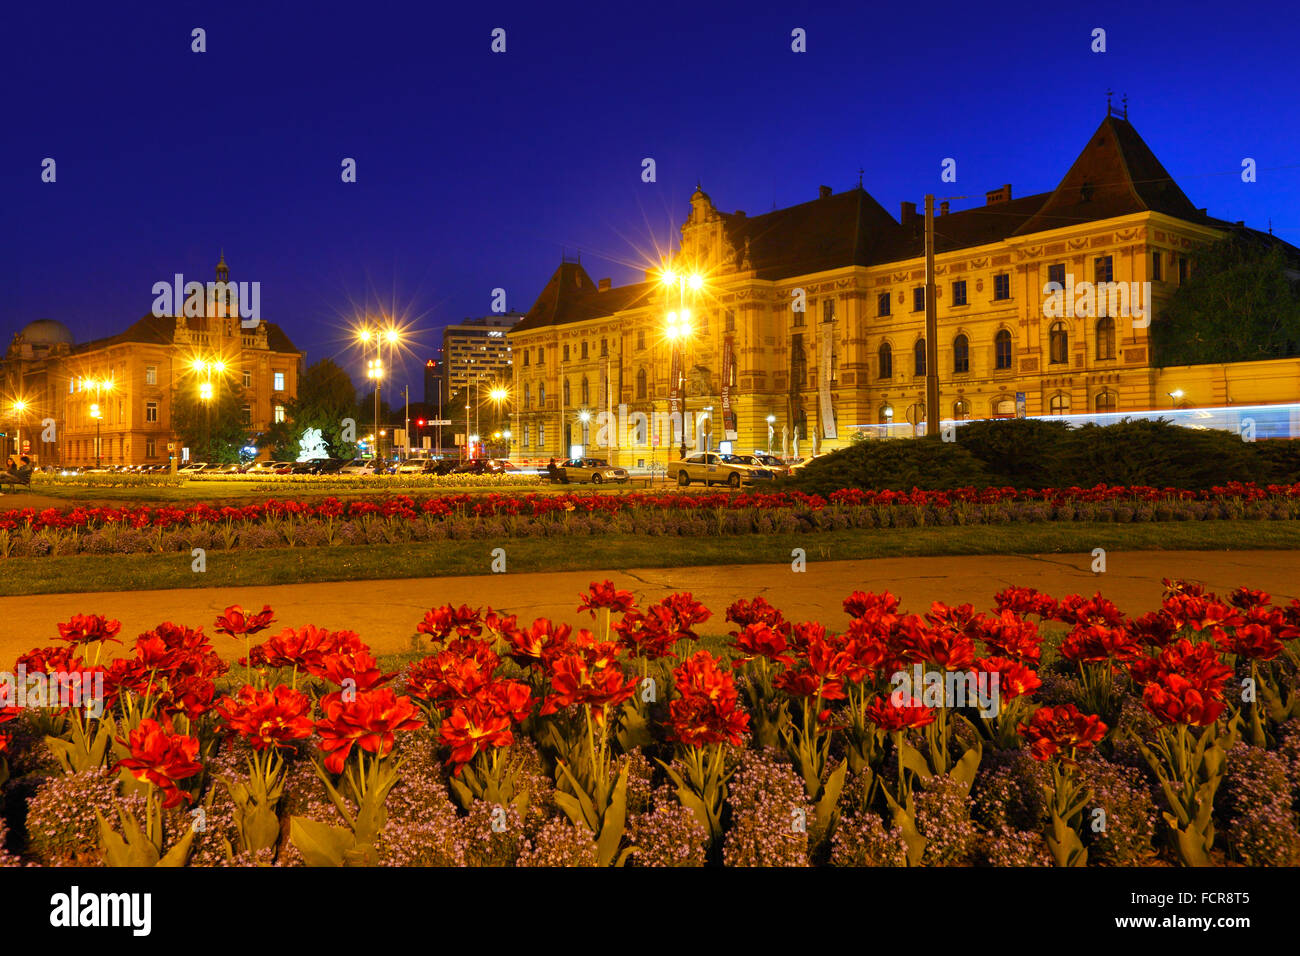 Zagreb night. Art And Craft museum on the right Stock Photo